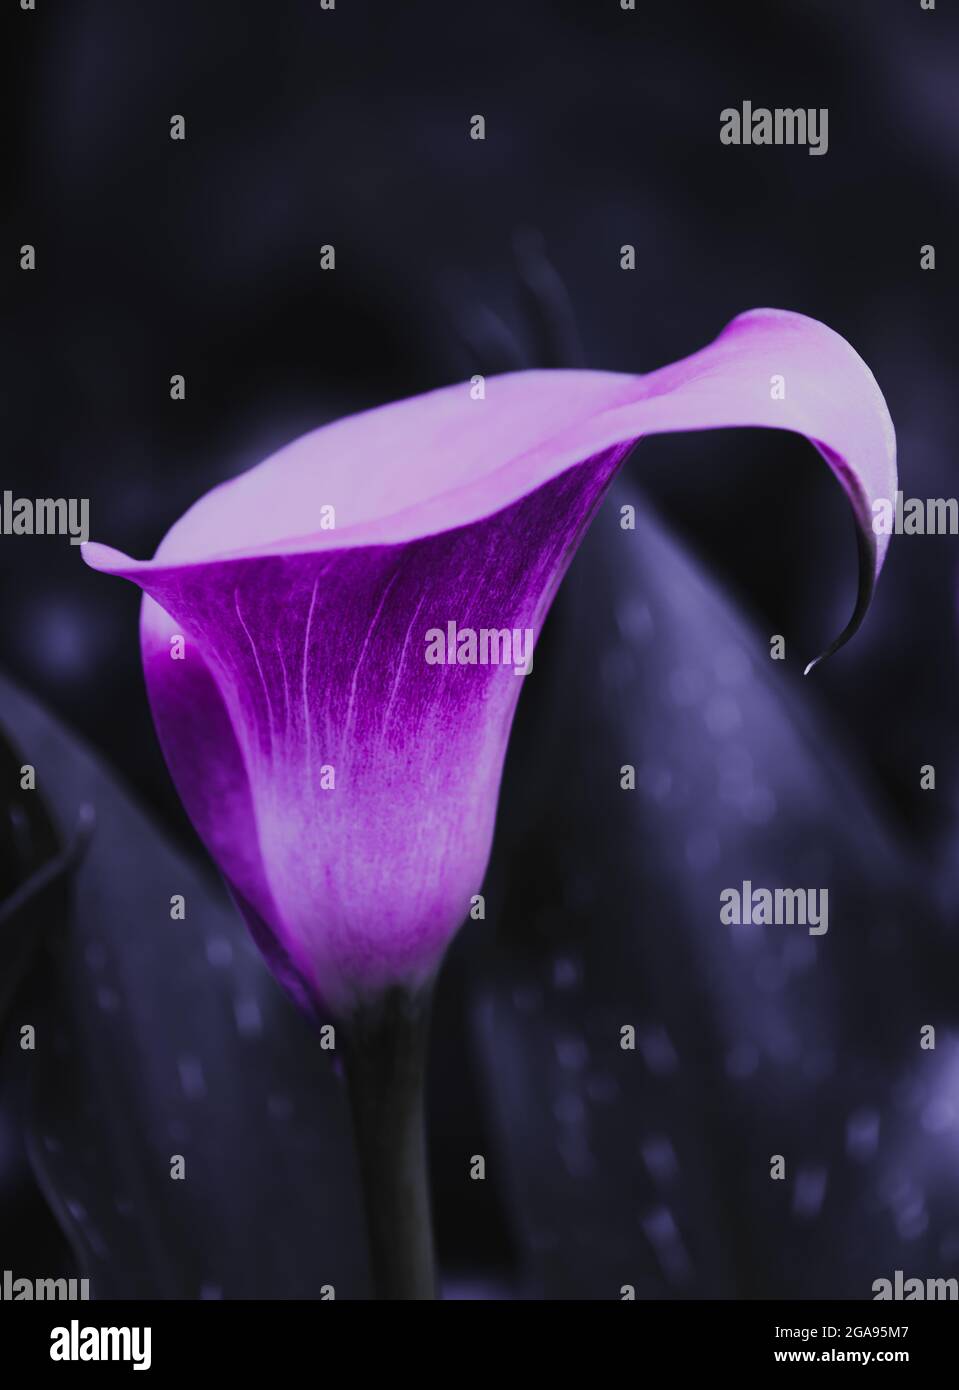 A calla lily in flower turned purple and the background underexposed to ...